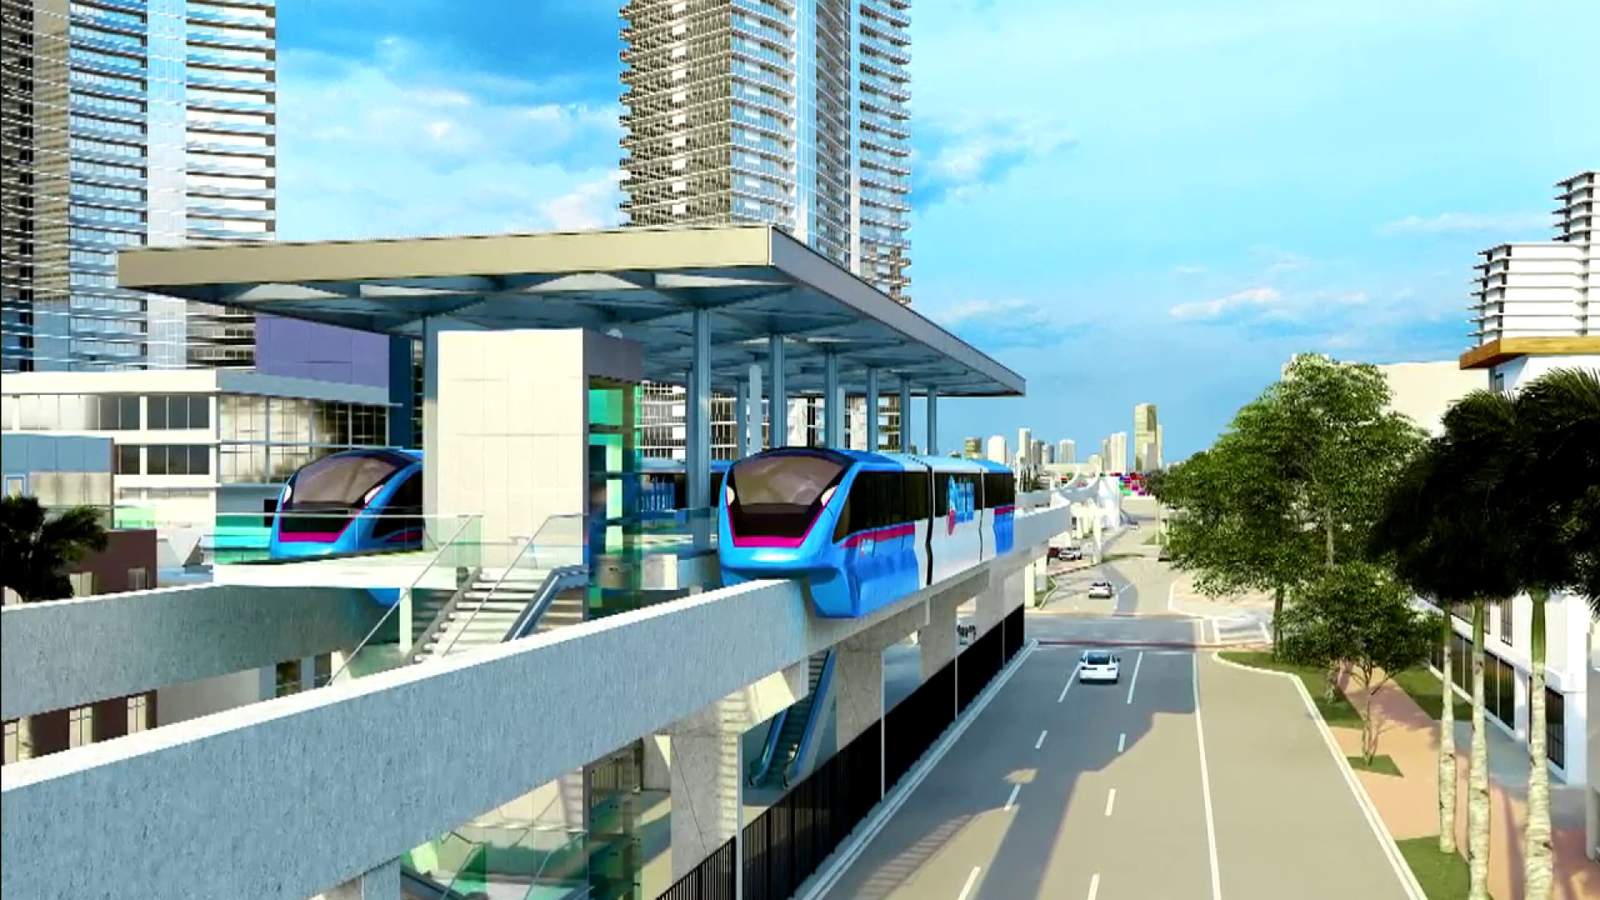 A monorail connecting Miami and Miami Beach? County agrees to fund planning.